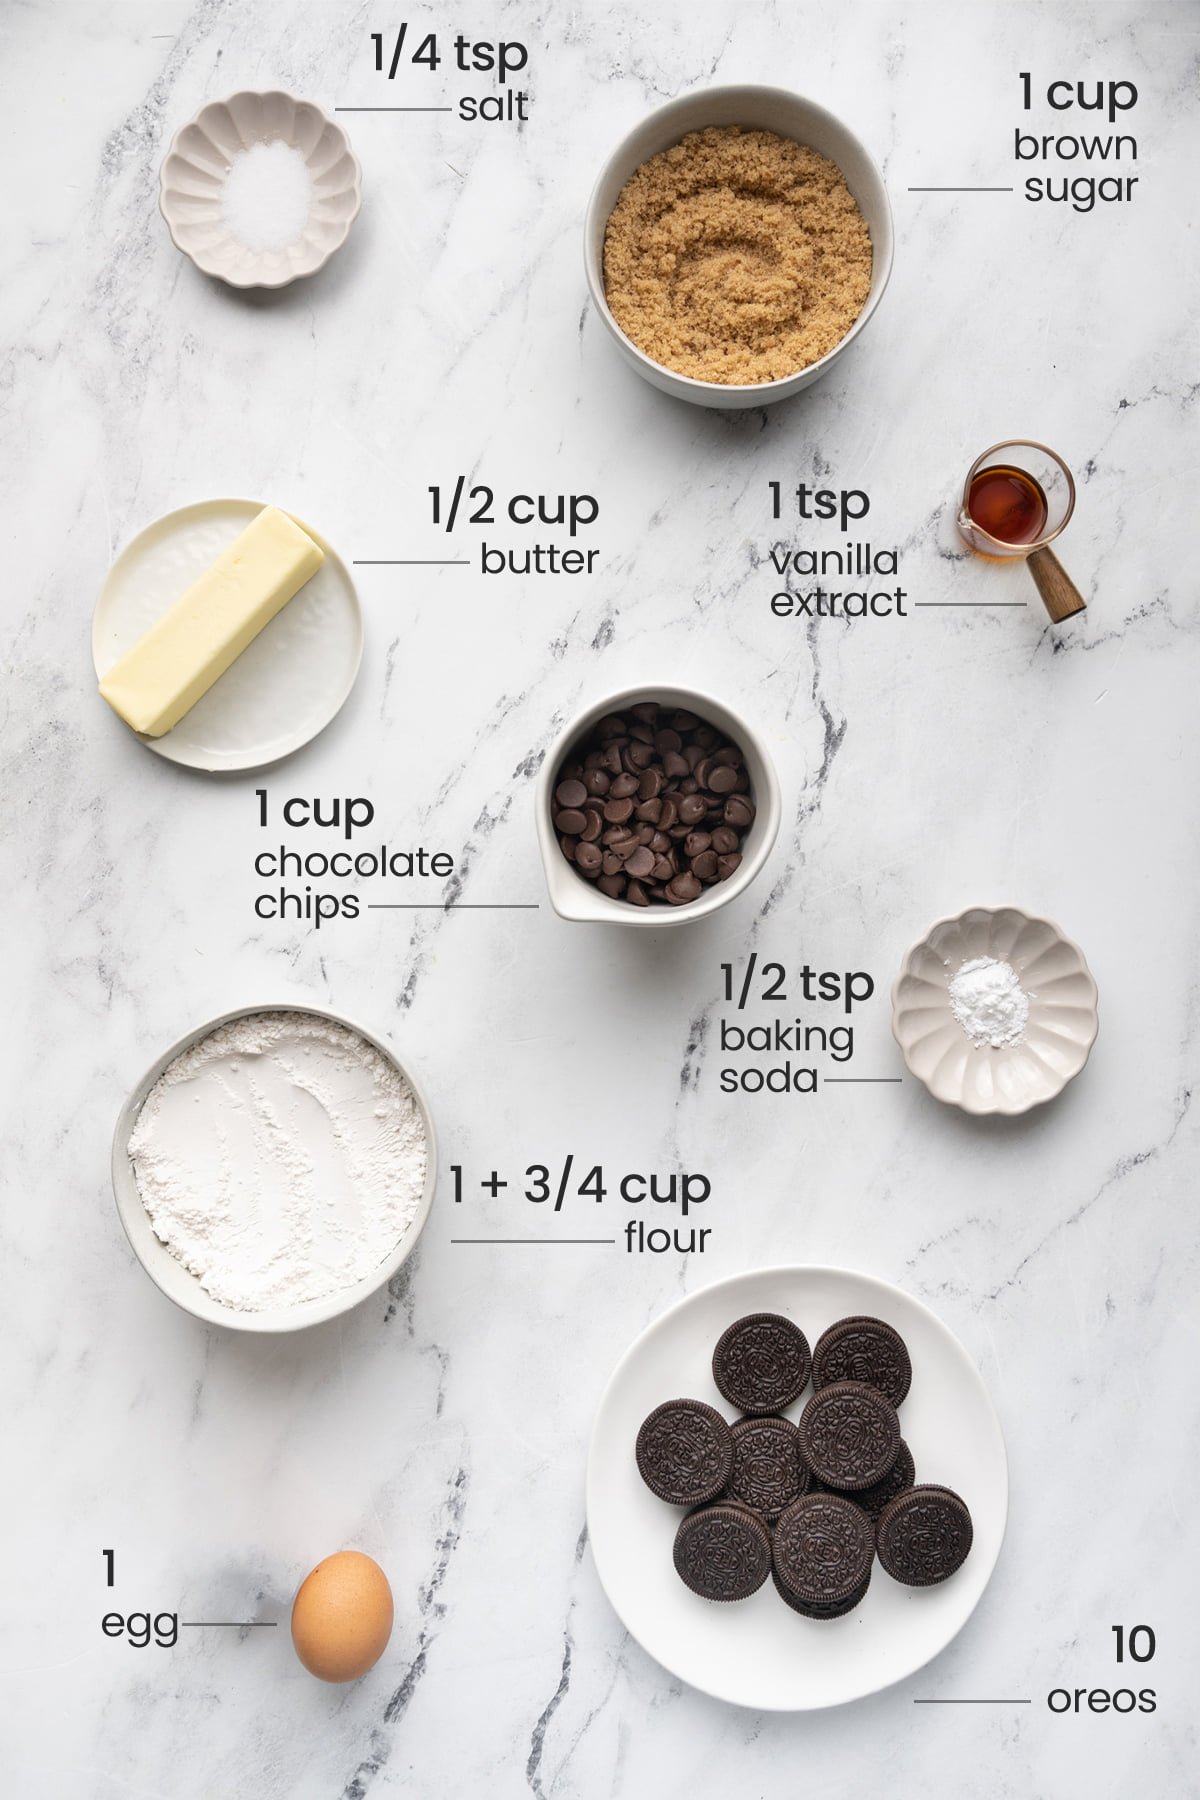 Oreo Chocolate Chip Cookies Ingredients - Salt, brown sugar, unsalted butter, chocolate chips, vanilla extract, chocolate chips, all-purpose flour, eggs, Oreos, and baking soda